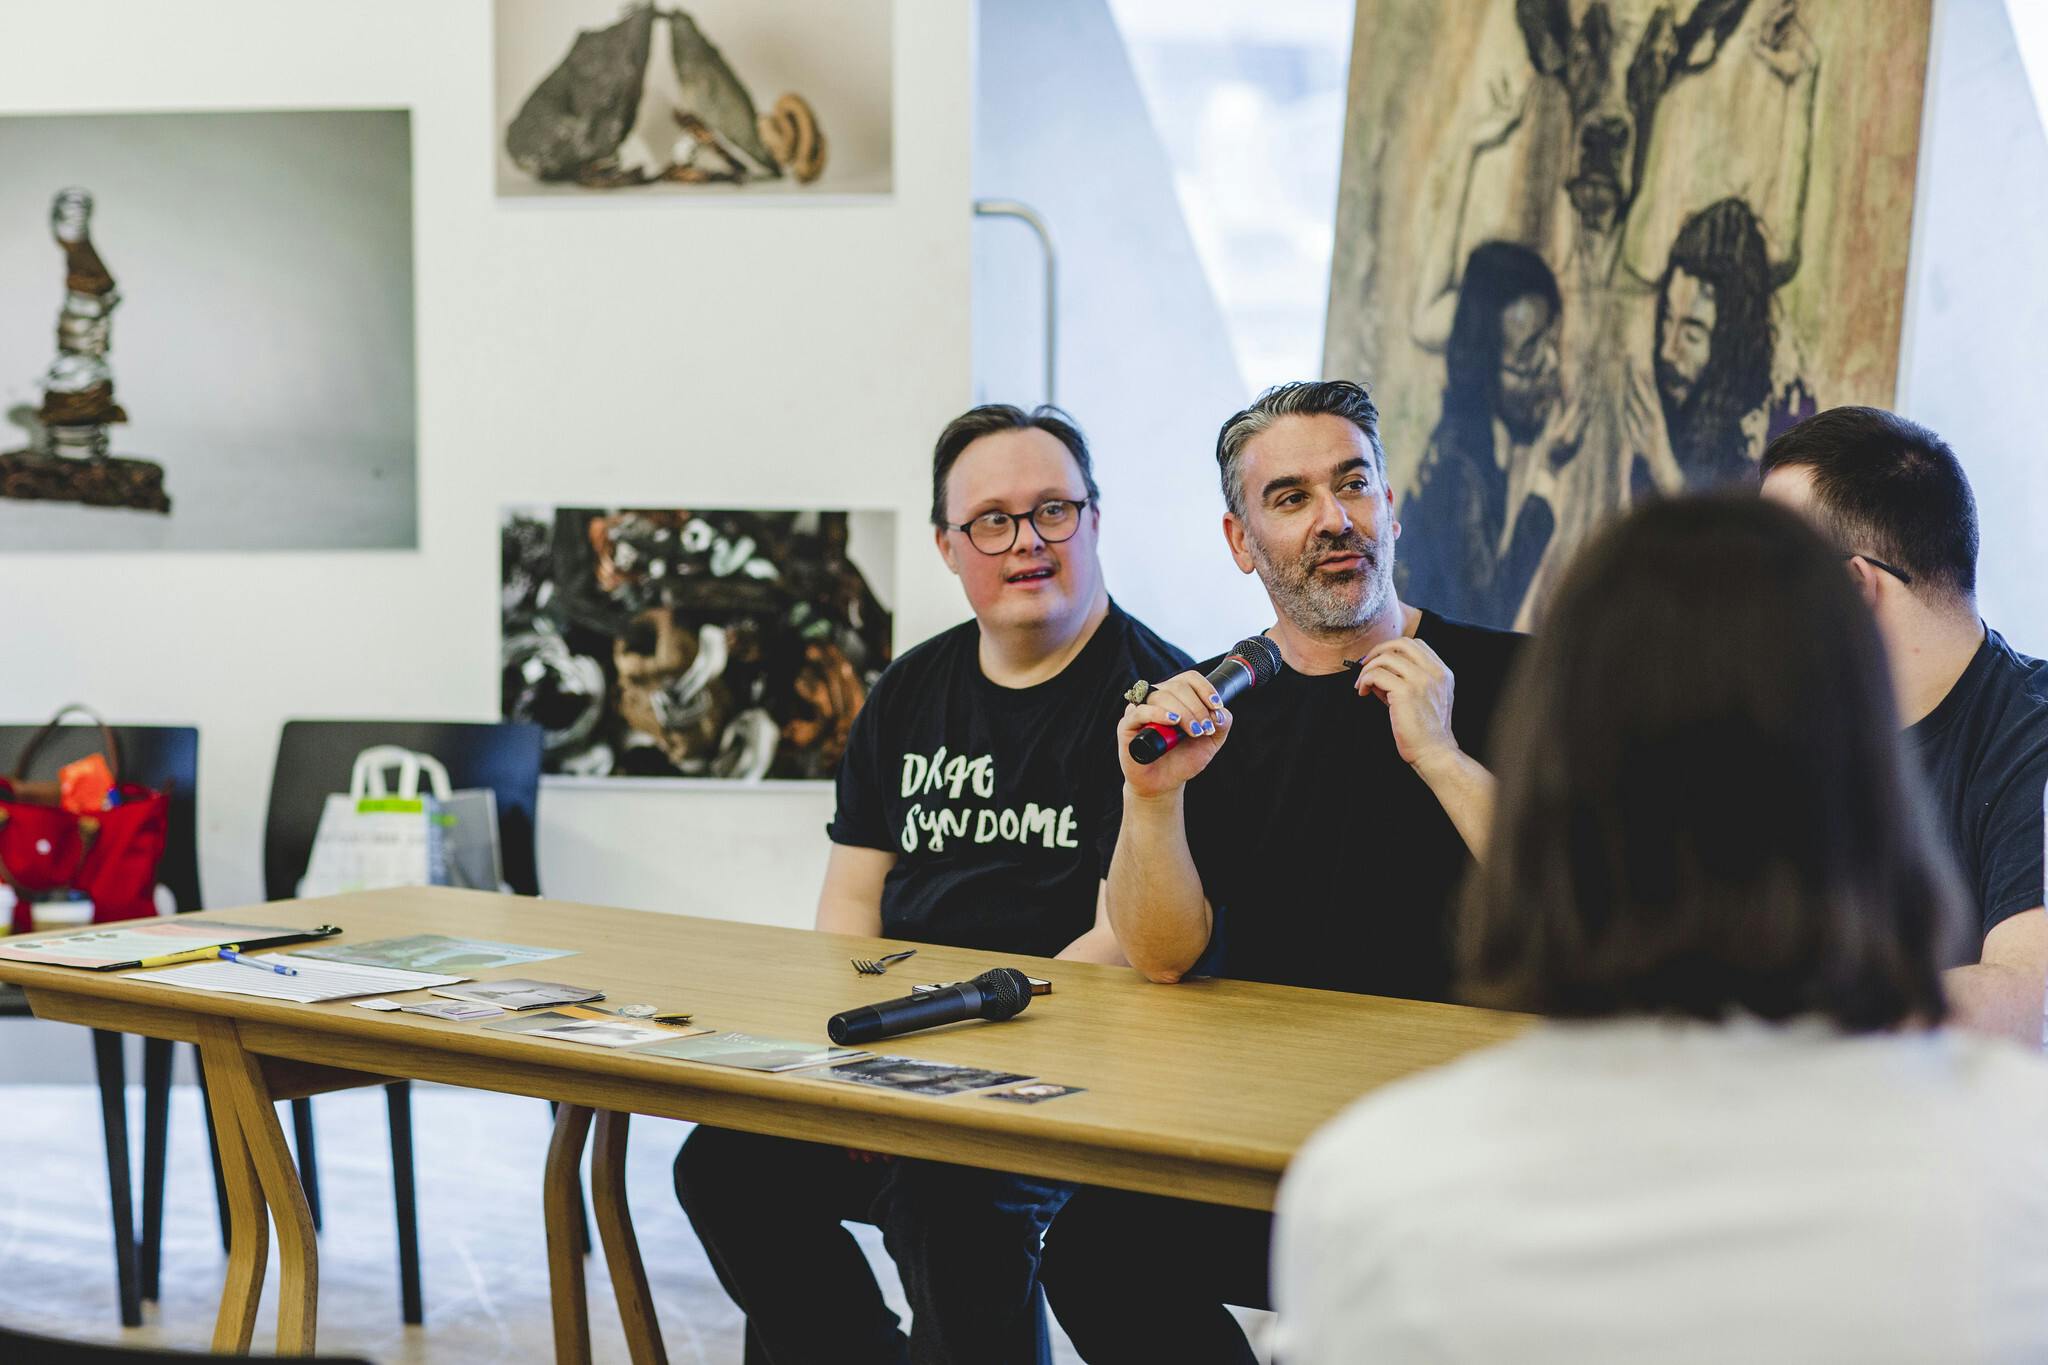 Taking place at Plymouth College of Art's Tate Exchange event, three representatives from The Radical Beauty project host a panel talk about down syndrome, beauty and representation.